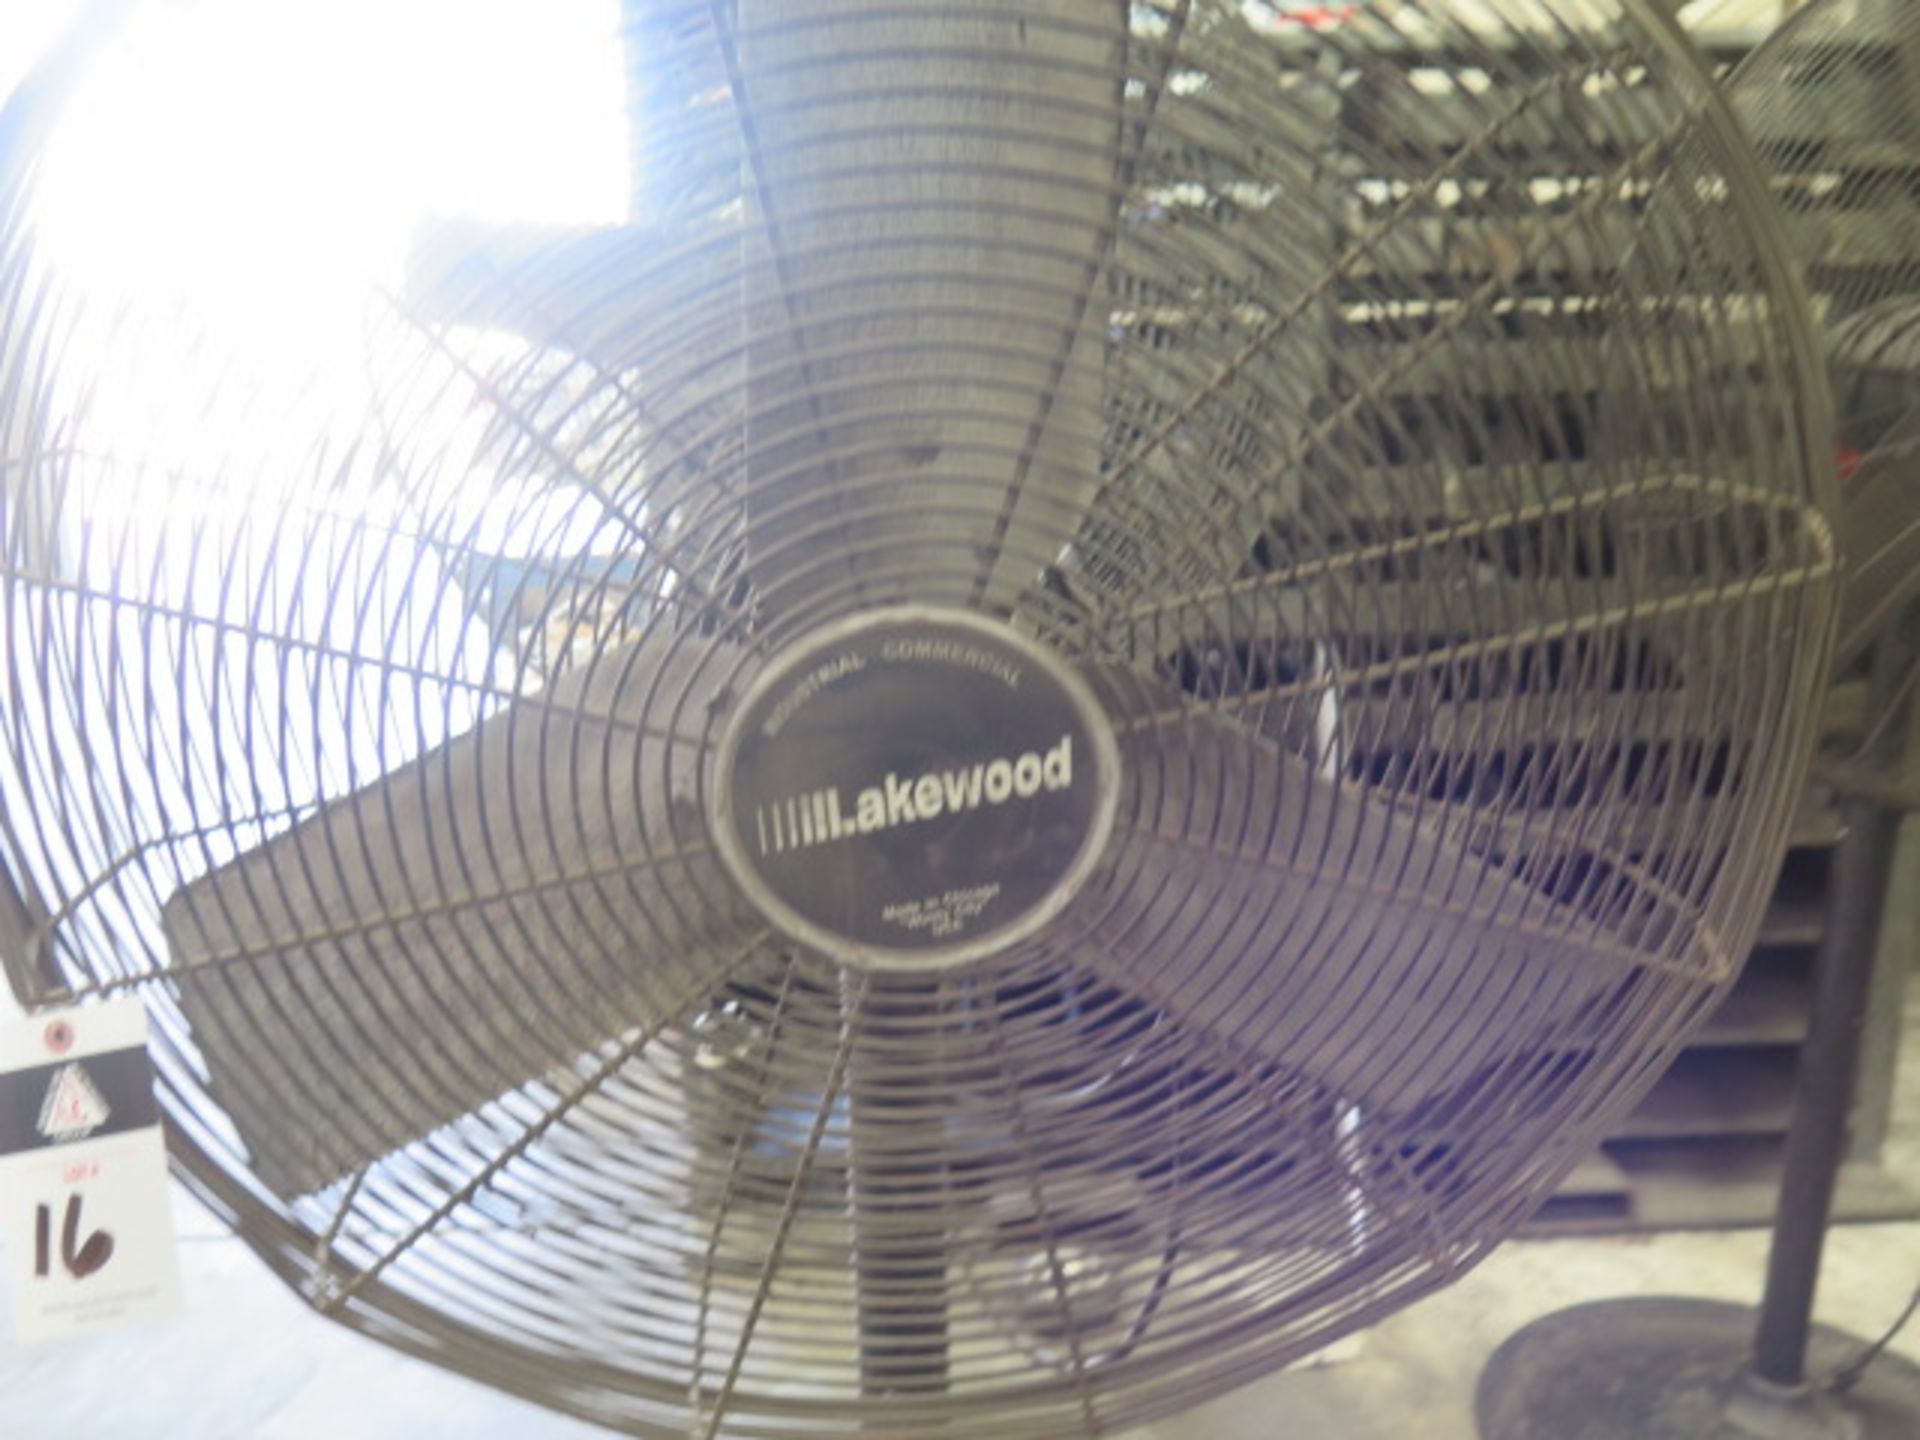 Shop Fans (2) (SOLD AS-IS - NO WARRANTY) - Image 3 of 3